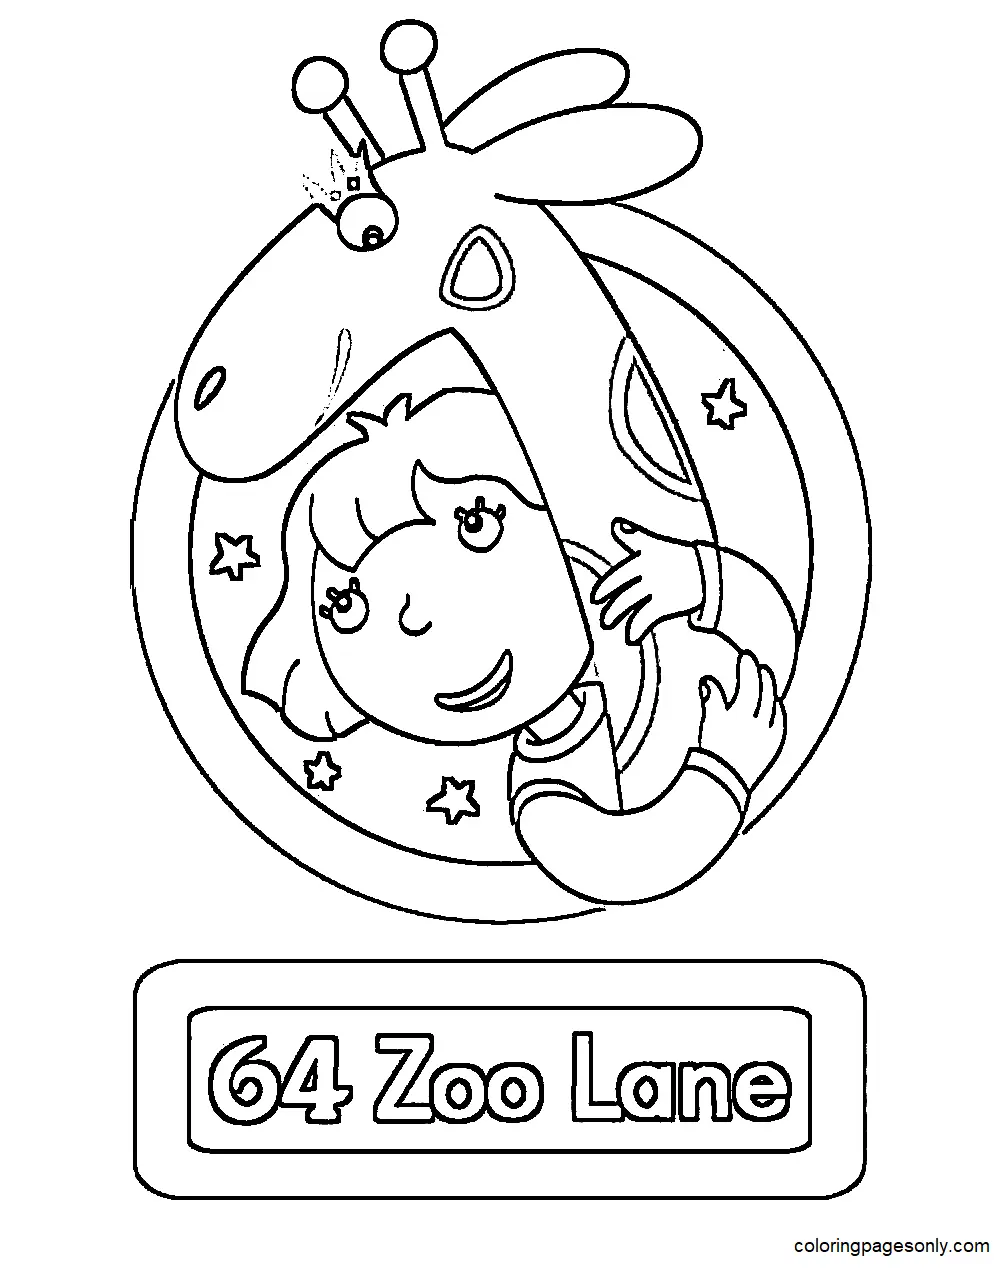 64 Zoo Lane Coloring Pages